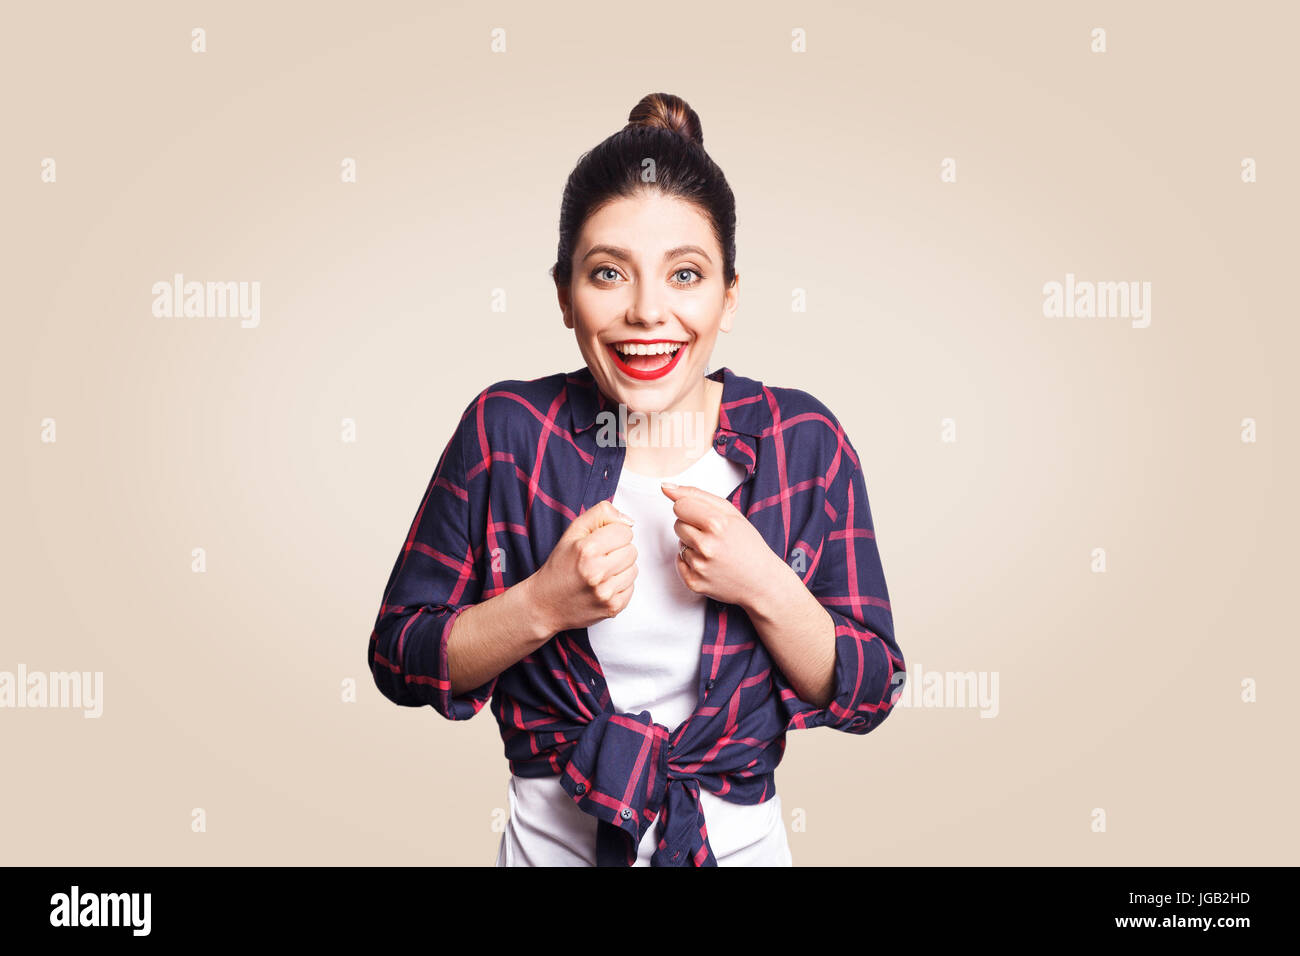 Happy excited young woman with black bun hair screaming or exclaiming, opening mouth widely, gesturing with hands, looking shocked after winning for t Stock Photo